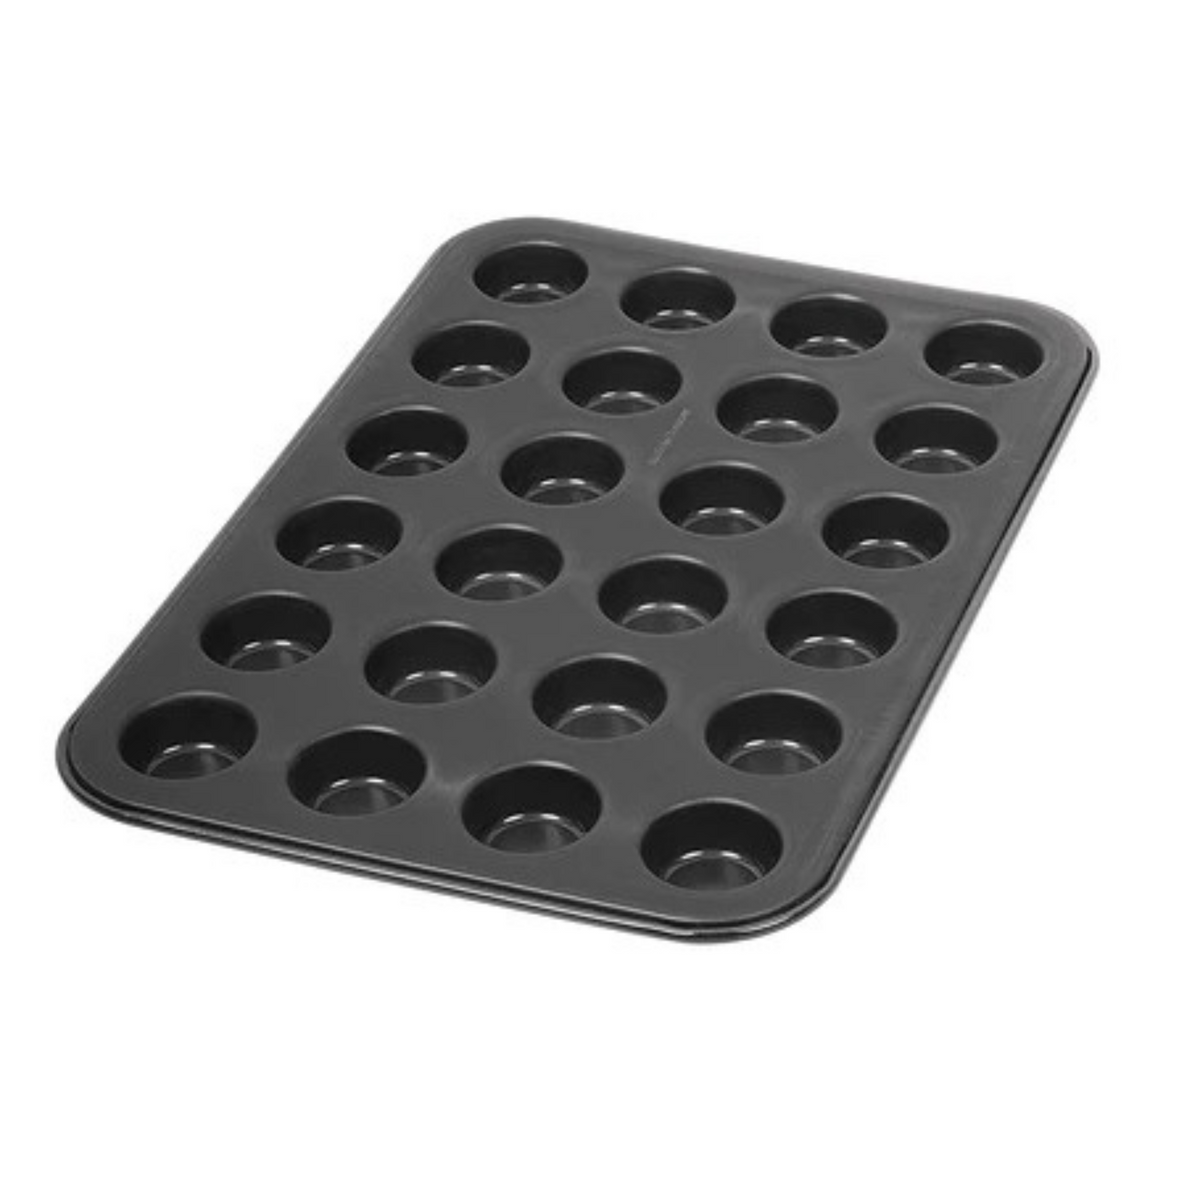 Tebery 2 Pack Mini Muffin Tray Non-Stick for Muffins, 24 Cup Muffin Baking Tray with Heat Conduction, Carbon Steel, 38x26x2CM